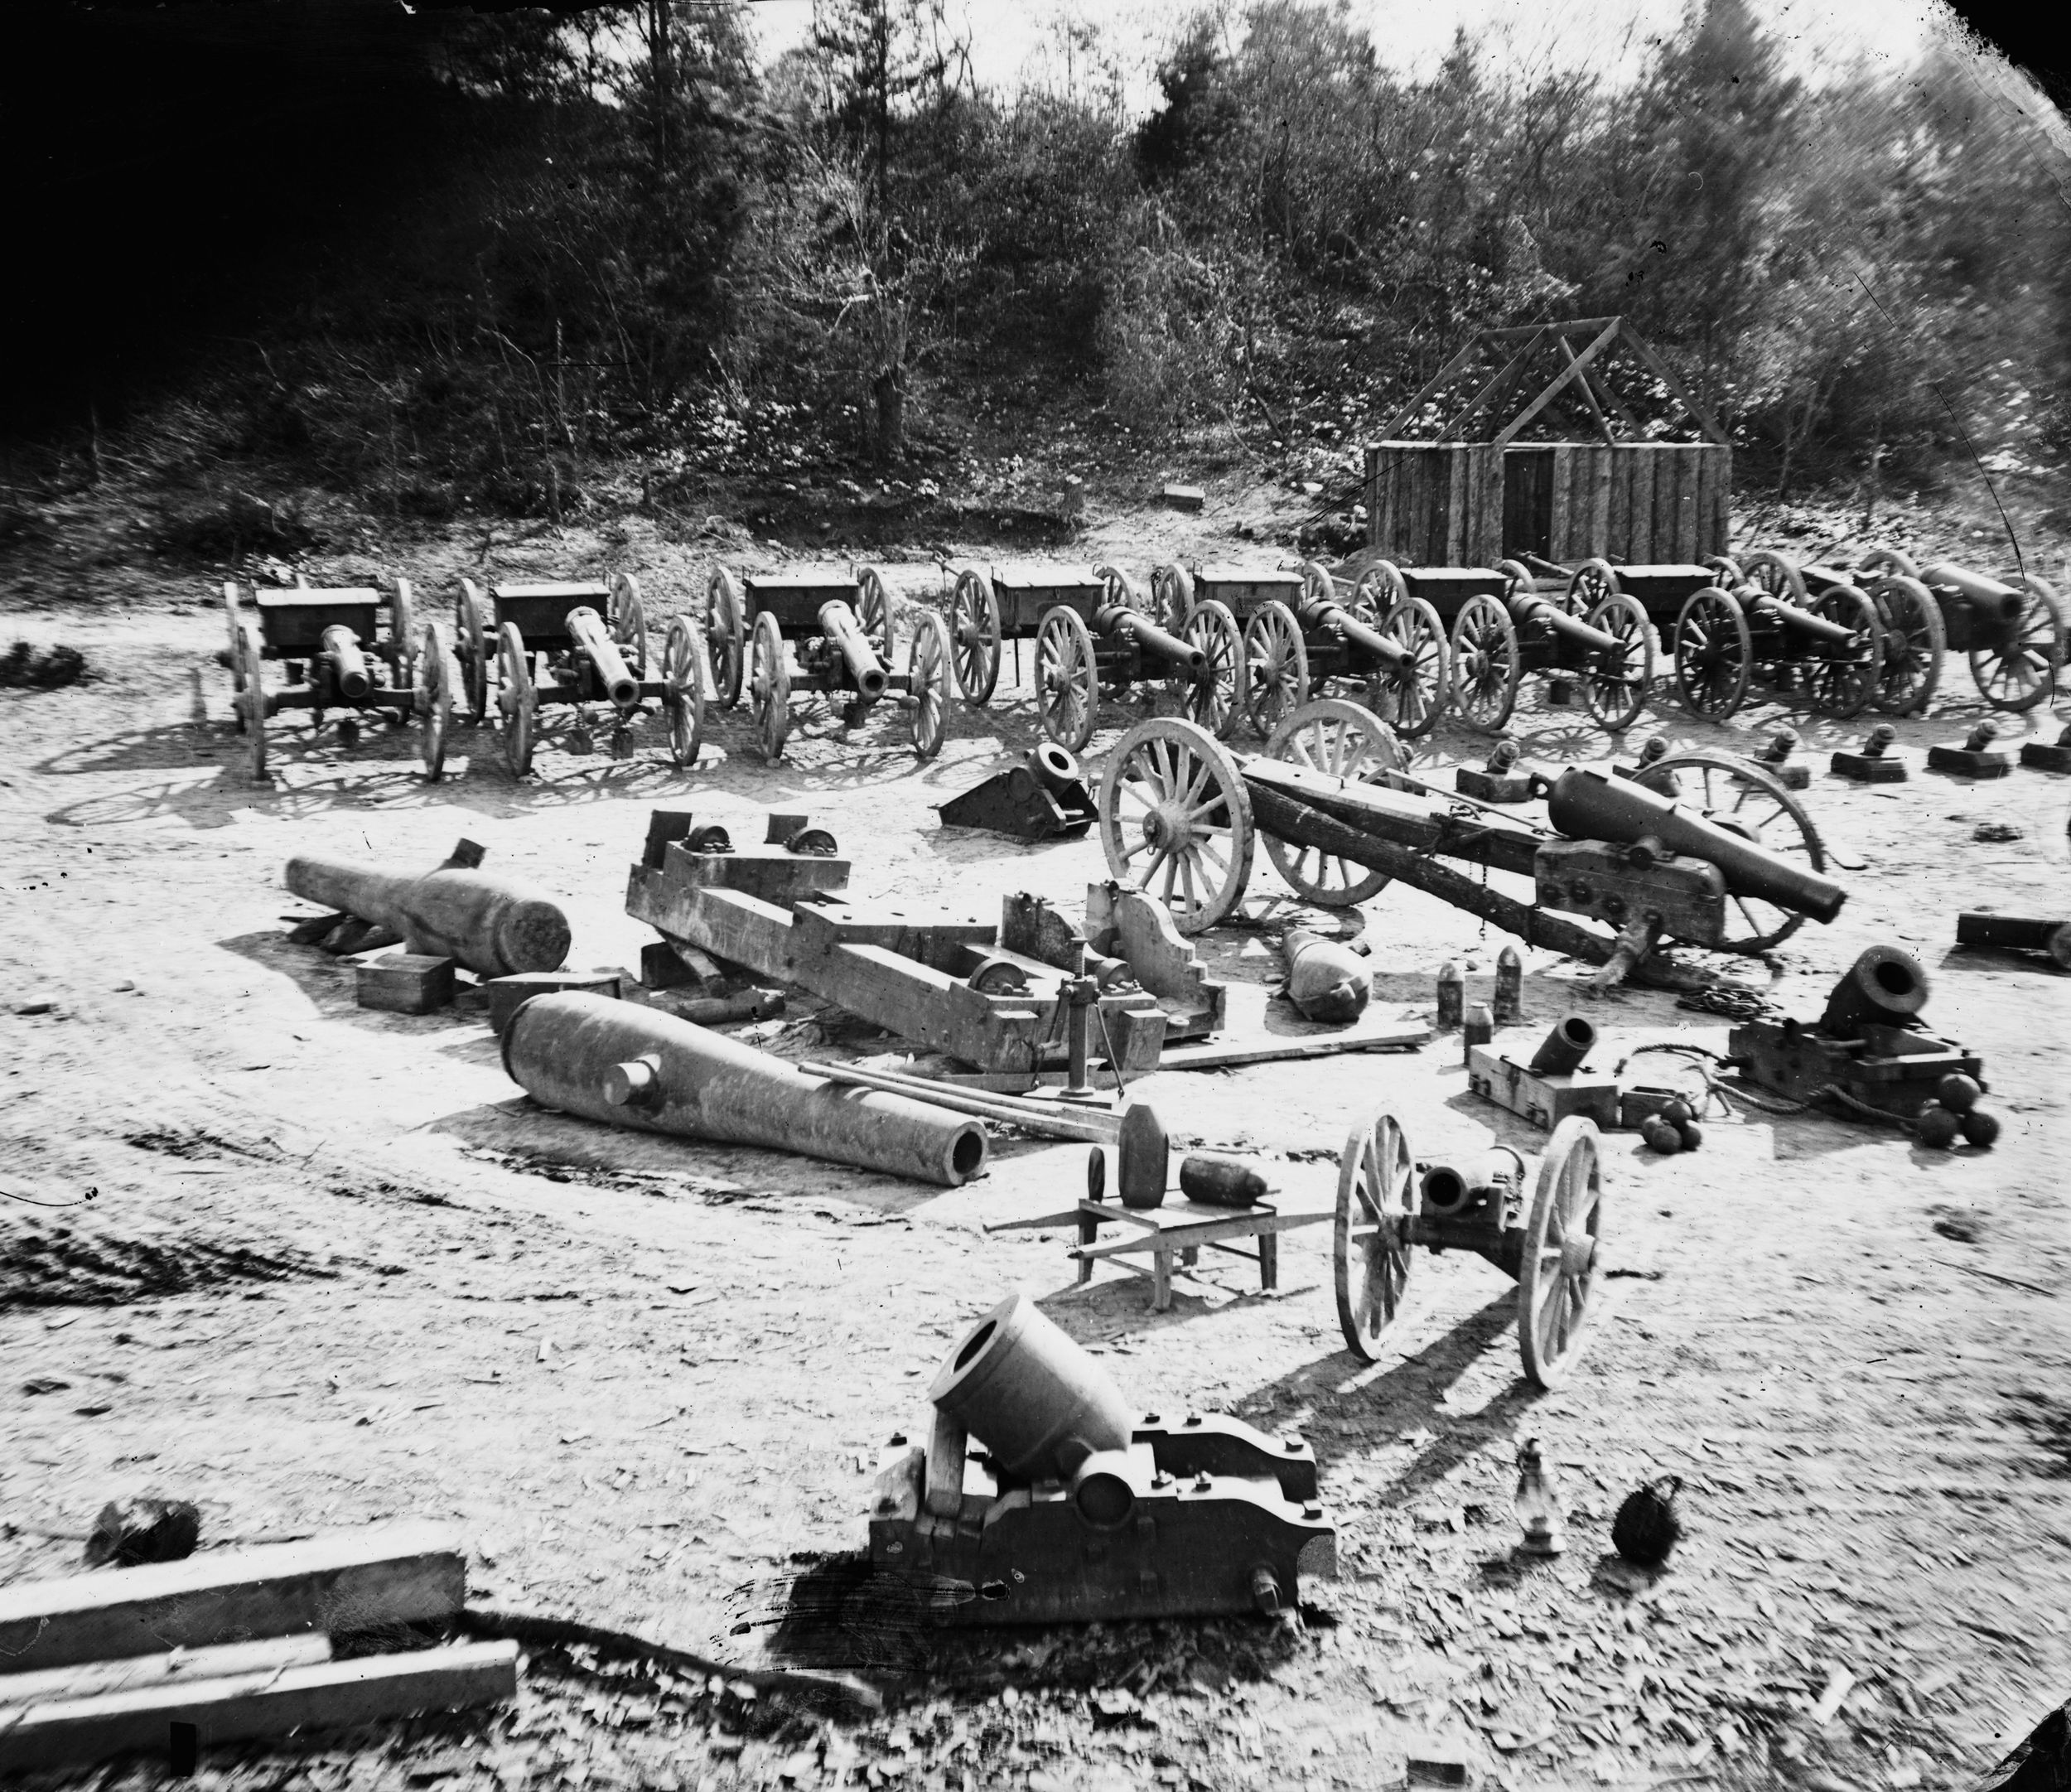 This famous photo shows mortars and other large artillery pieces on the beach below the town.